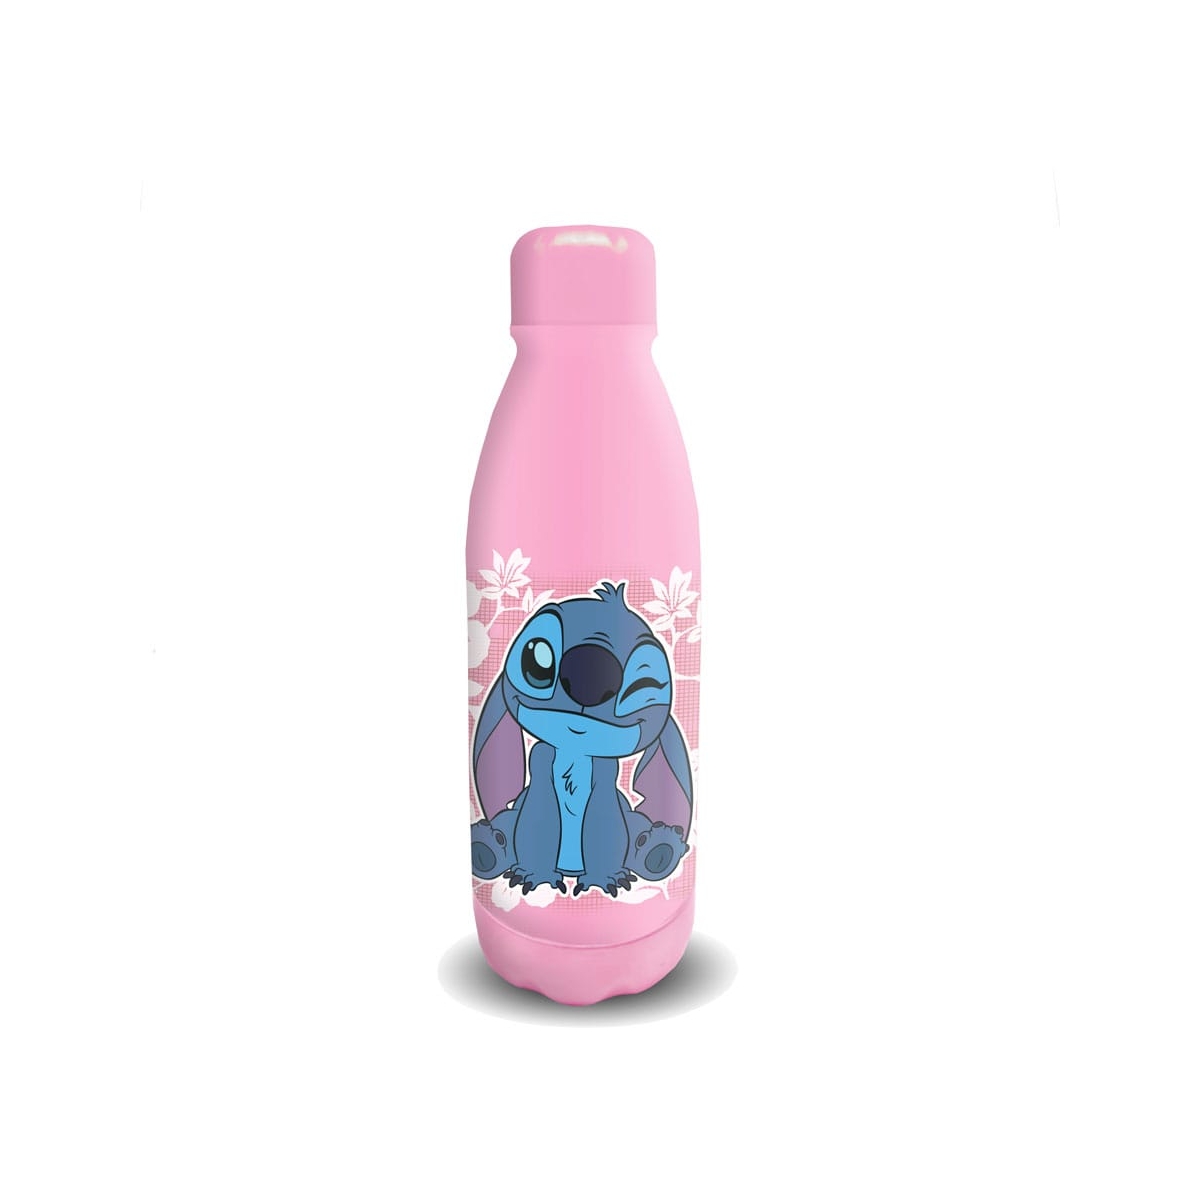 https://www.figurine-discount.com/284674-thickbox_default/lilo-stitch-bouteille-isotherme-maui.jpg